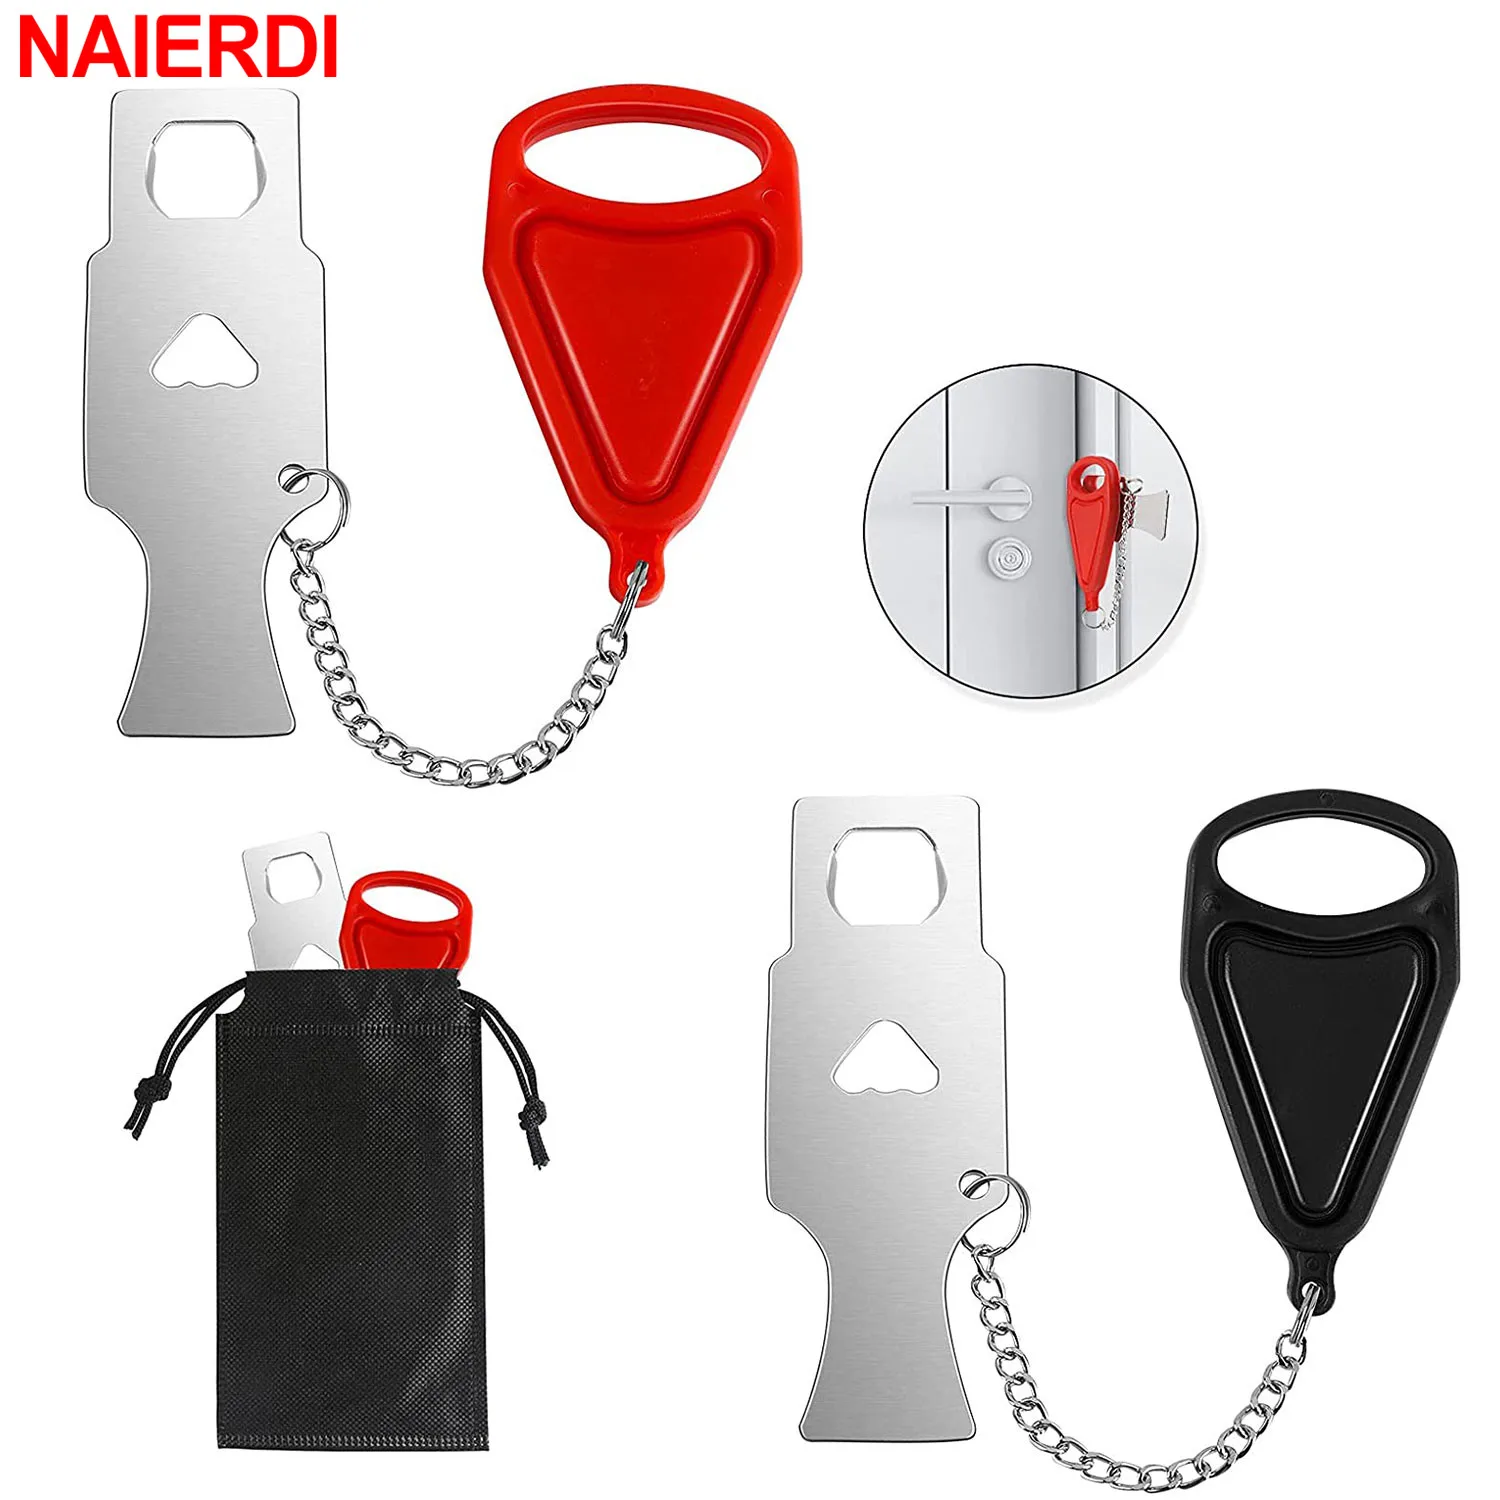 NAIERDI Portable Door Lock Safety Latch Metal Lock Anti Theft Security Lock Great for Travel Dormitory,Airbnb,Hotel,Home, Motel